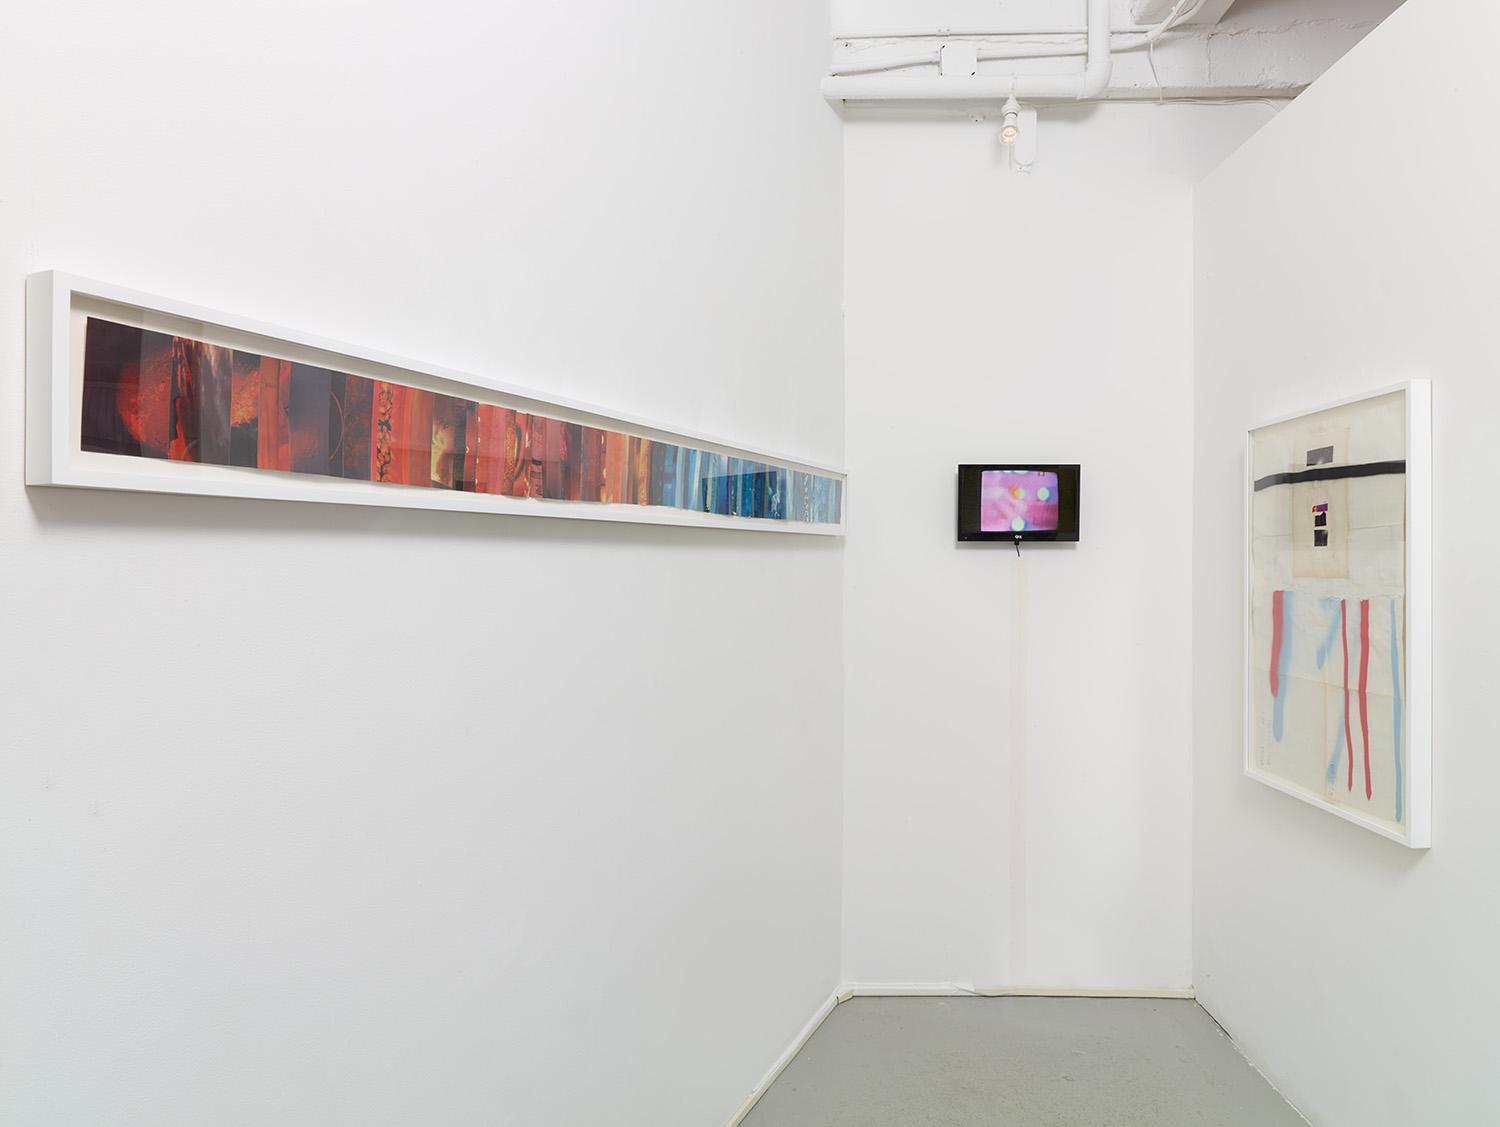 Installation view of Josh Slater's solo exhibition ' Satisfaction Circuit' with collage-based works on paper